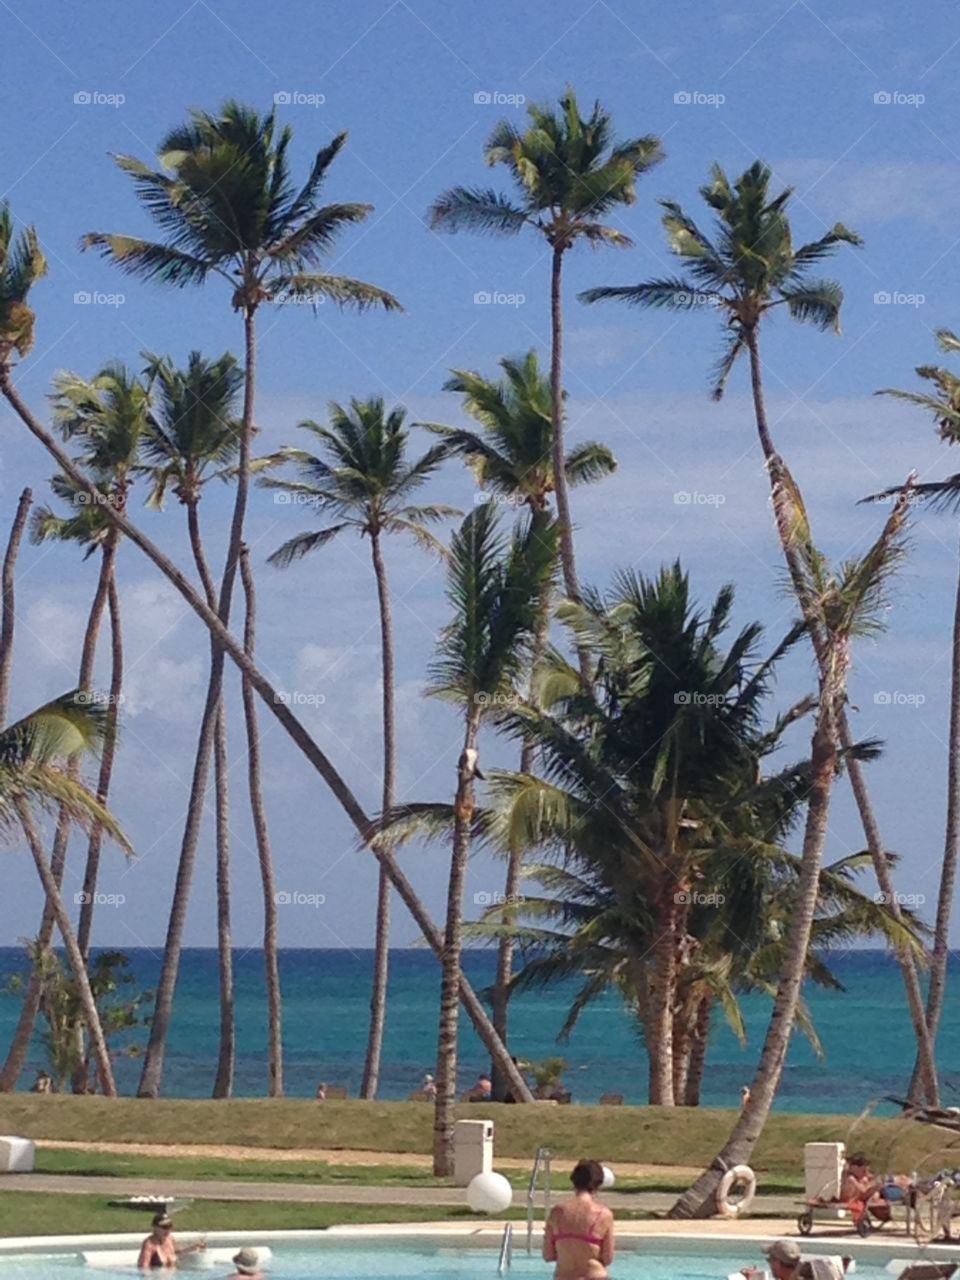 Palm trees and beaches. 